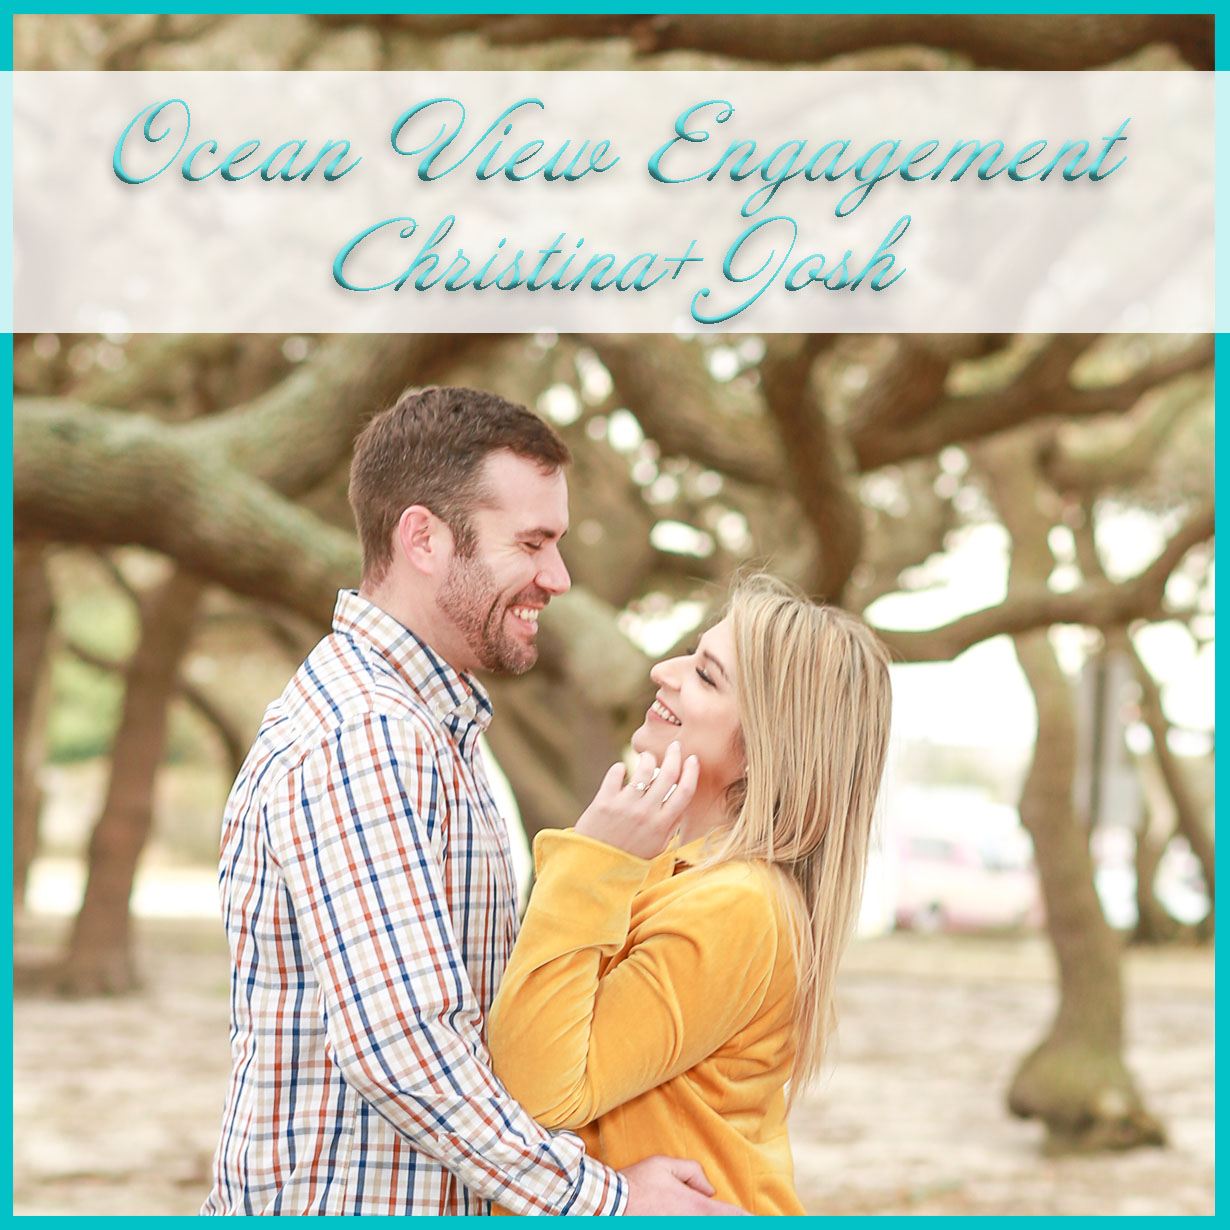 Ocean View Engagement Session